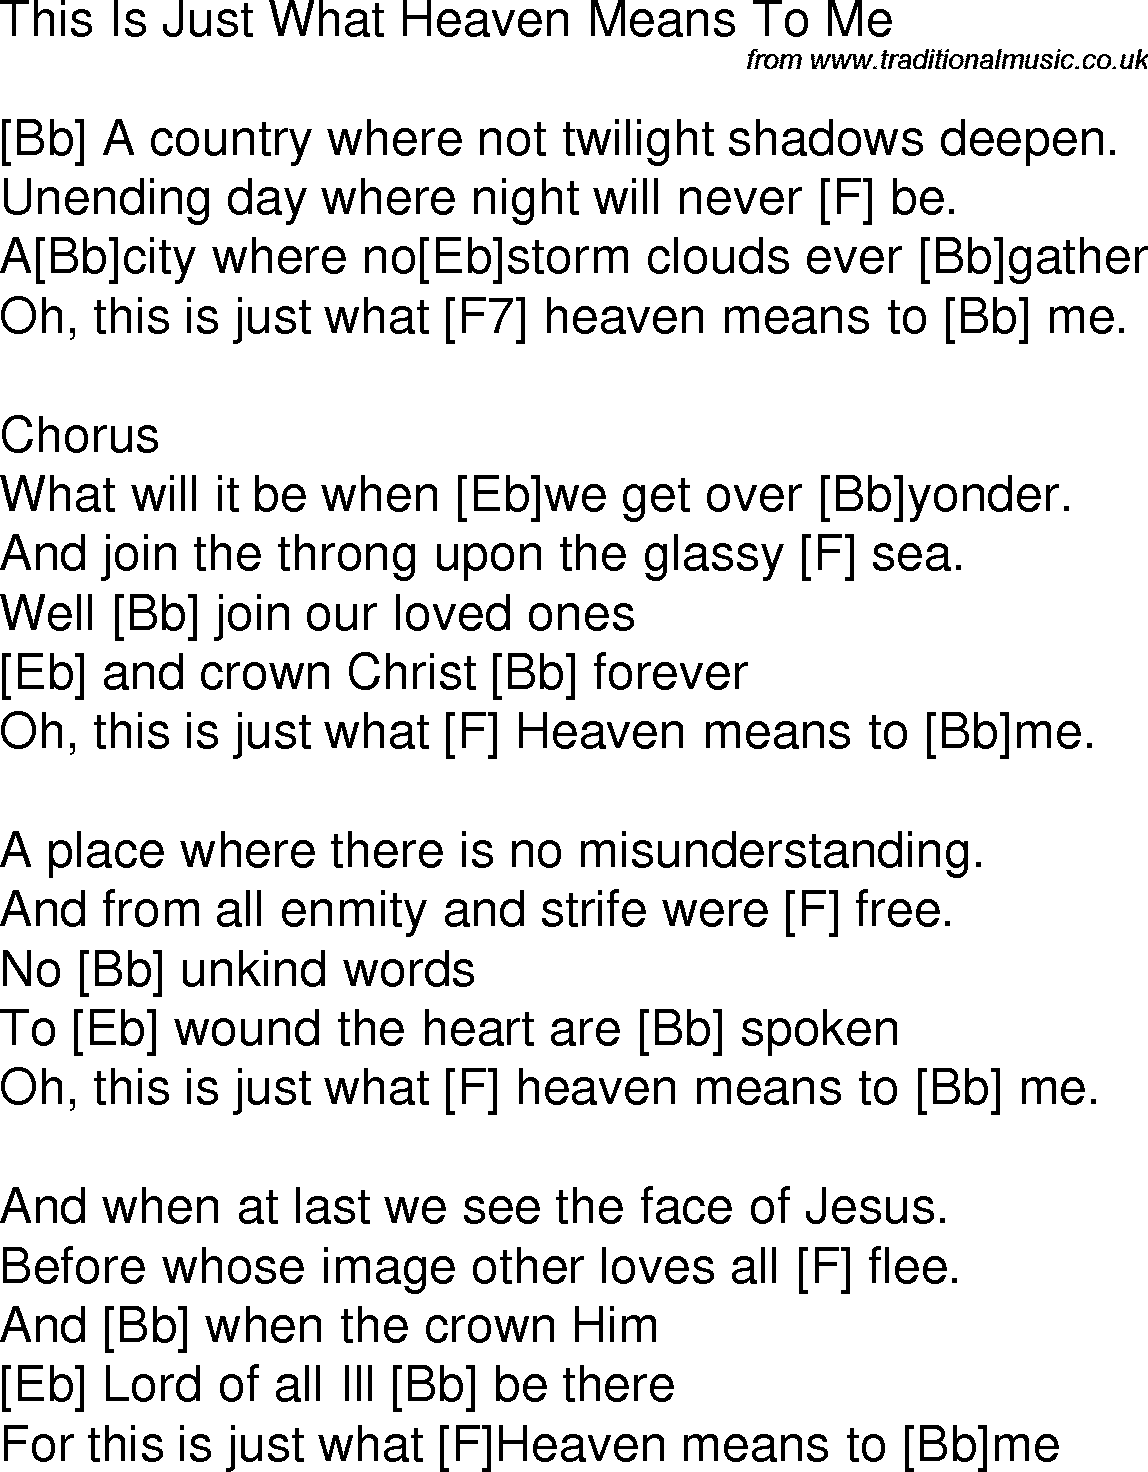 Old time song lyrics with chords for This Is Just What Heaven Means To Me Bb